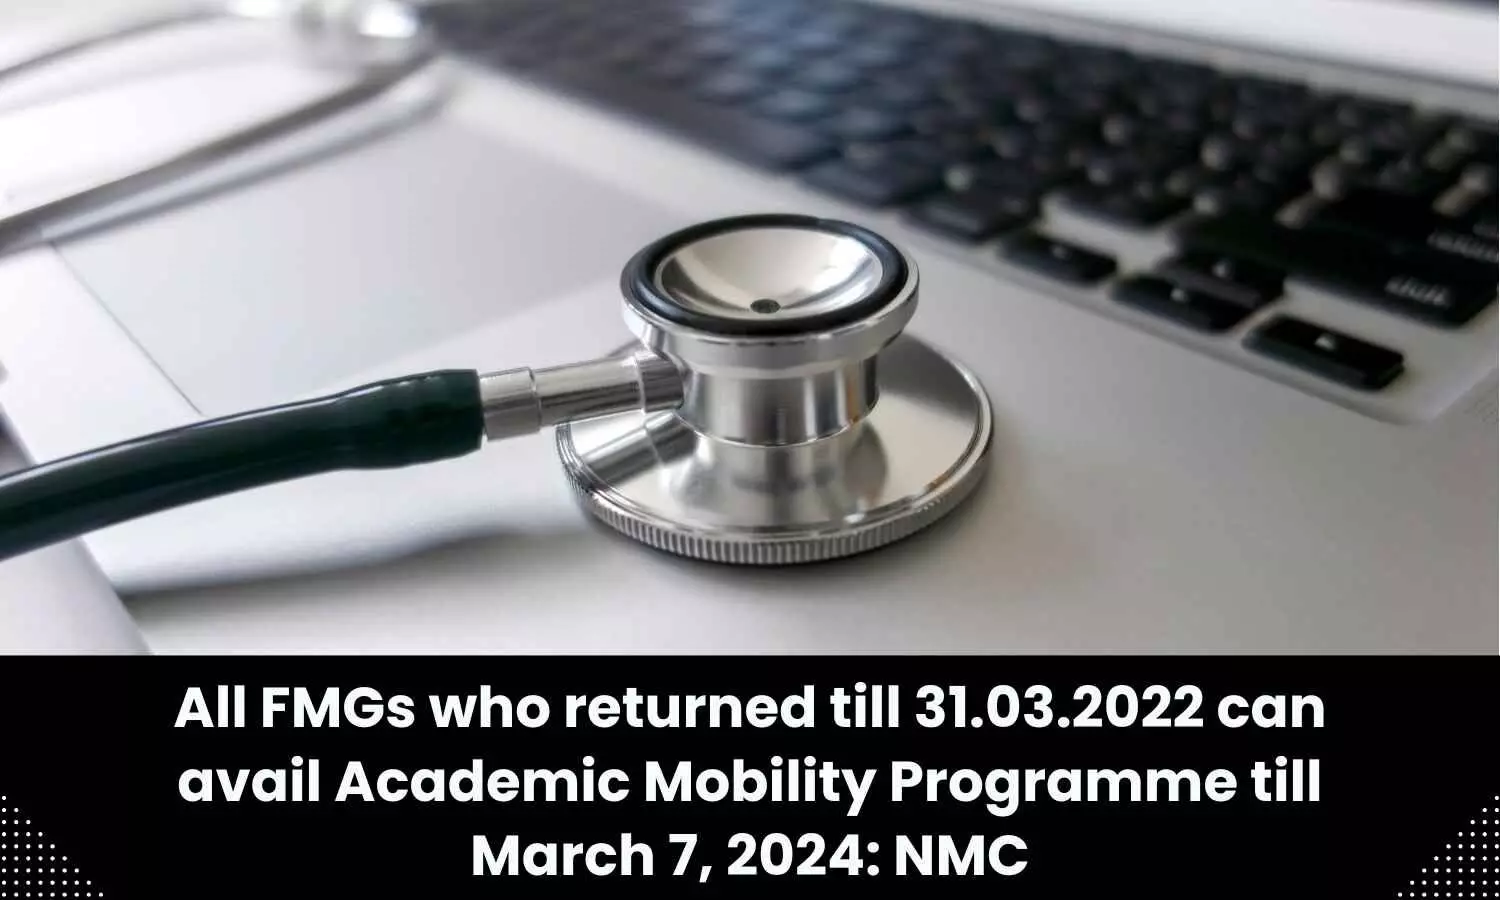 NMC sets deadline for FMGs to avail benefits of Academic Mobility Programme